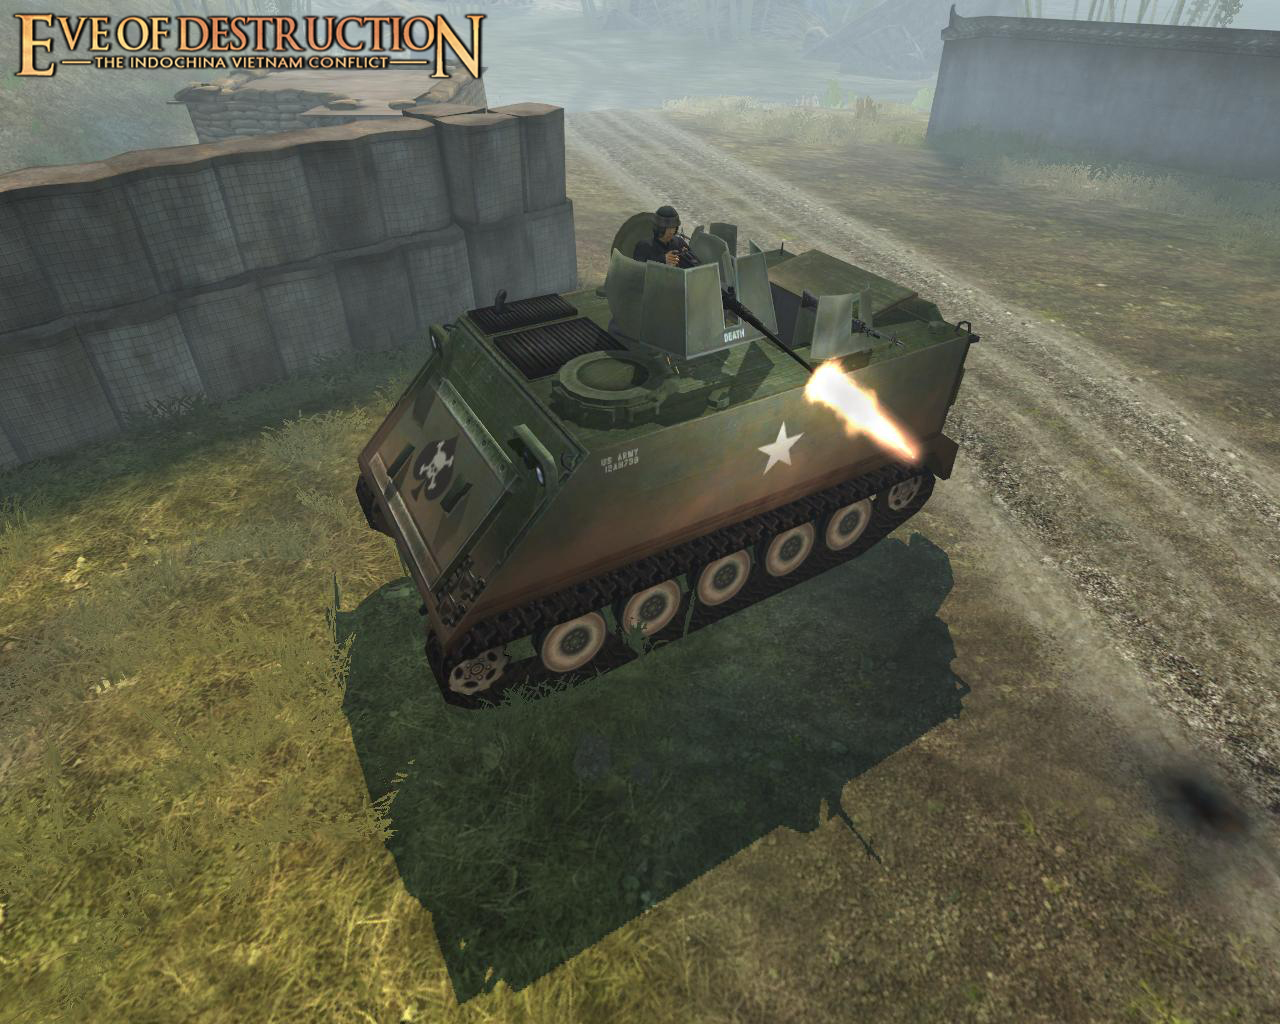 M113 in Aktion